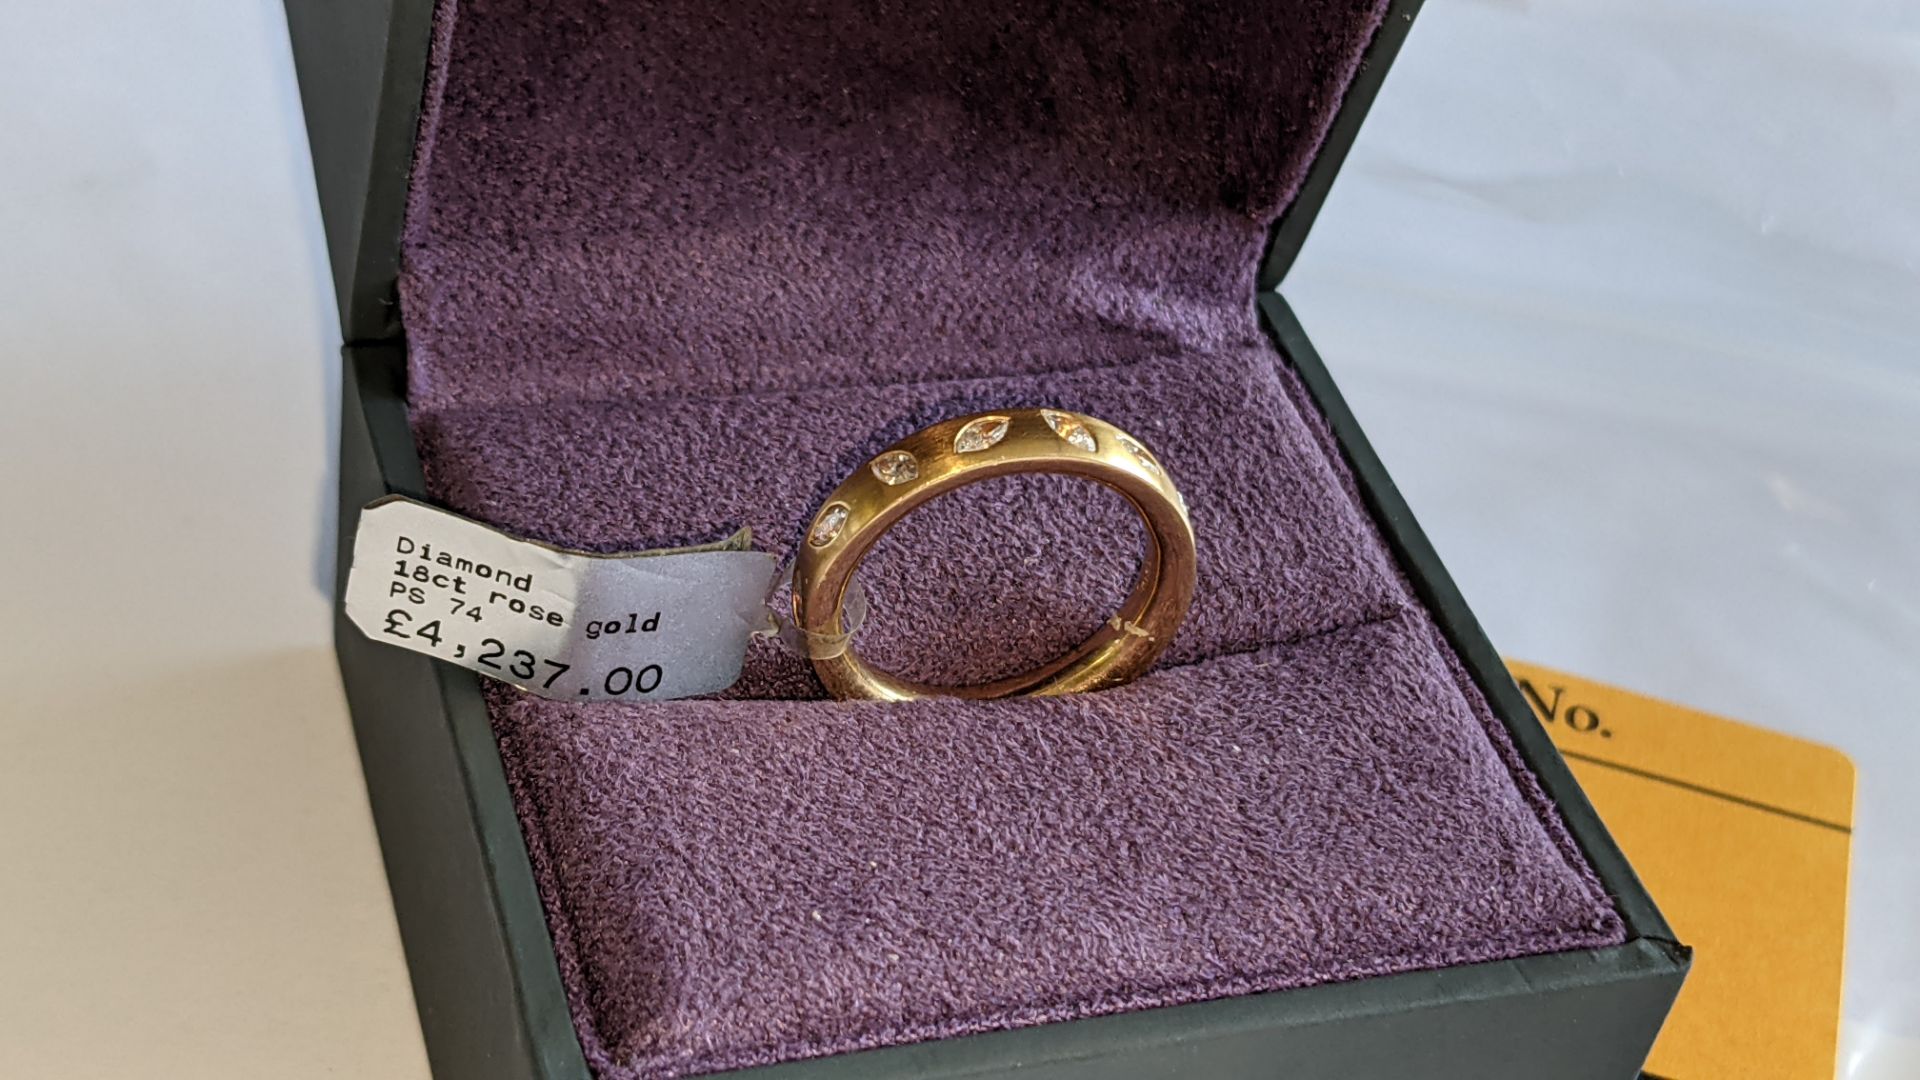 18ct rose gold & diamond ring with 0.75ct (G/VS1) total carat weight. RRP £4,237 - Image 4 of 17